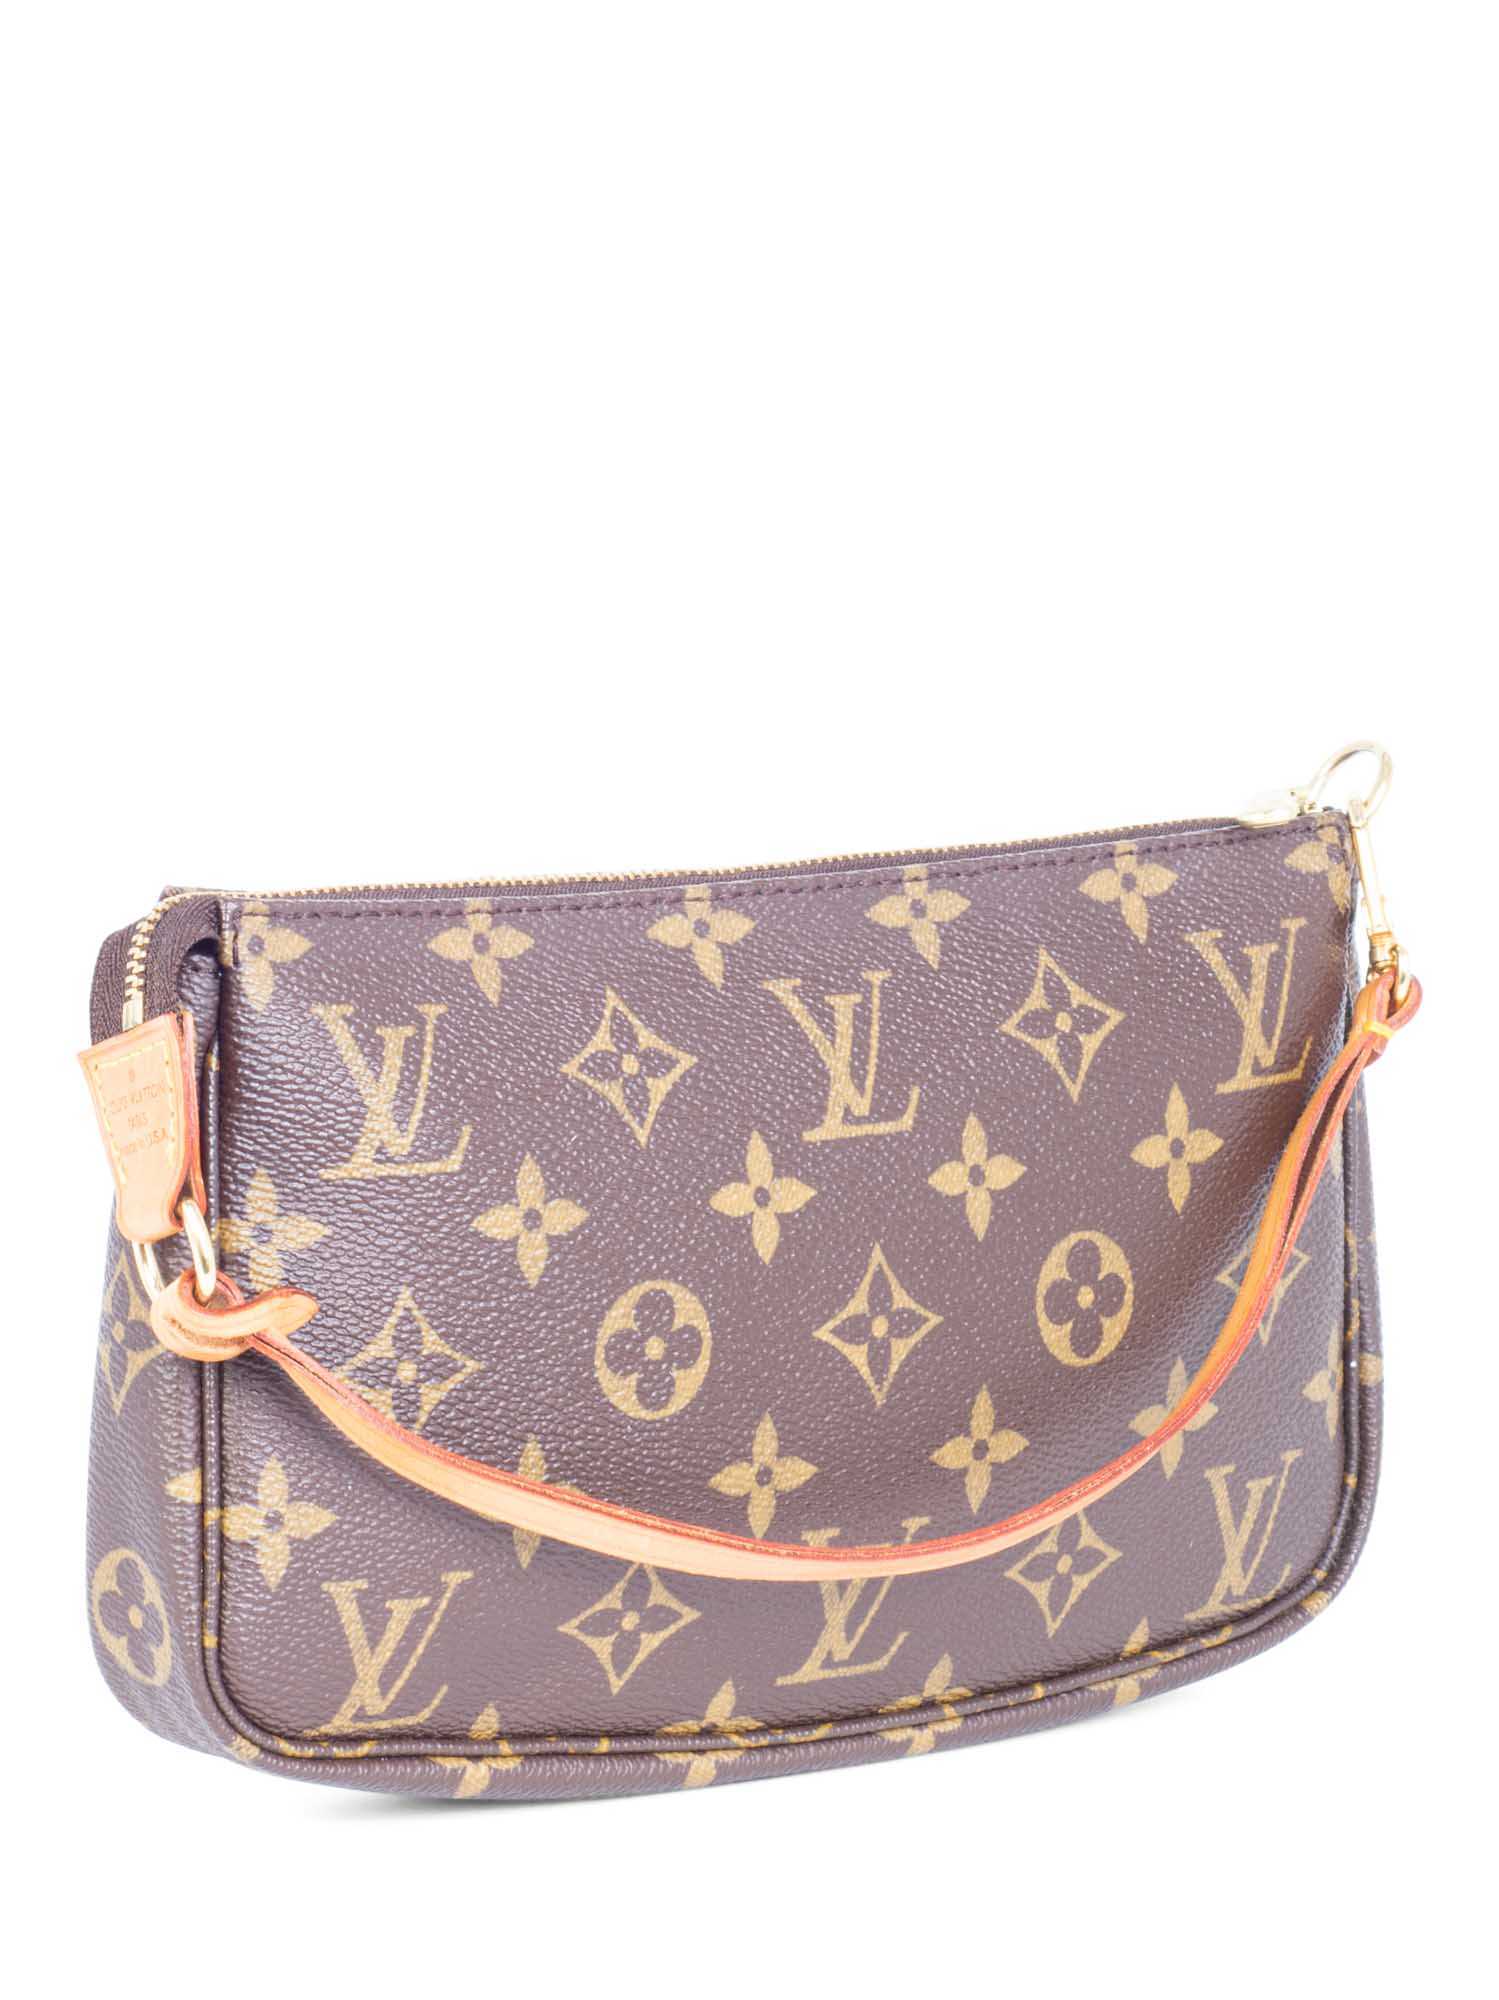 GUIDE How Do You Safely Clean a Louis Vuitton Bag at Home  Bagaholic